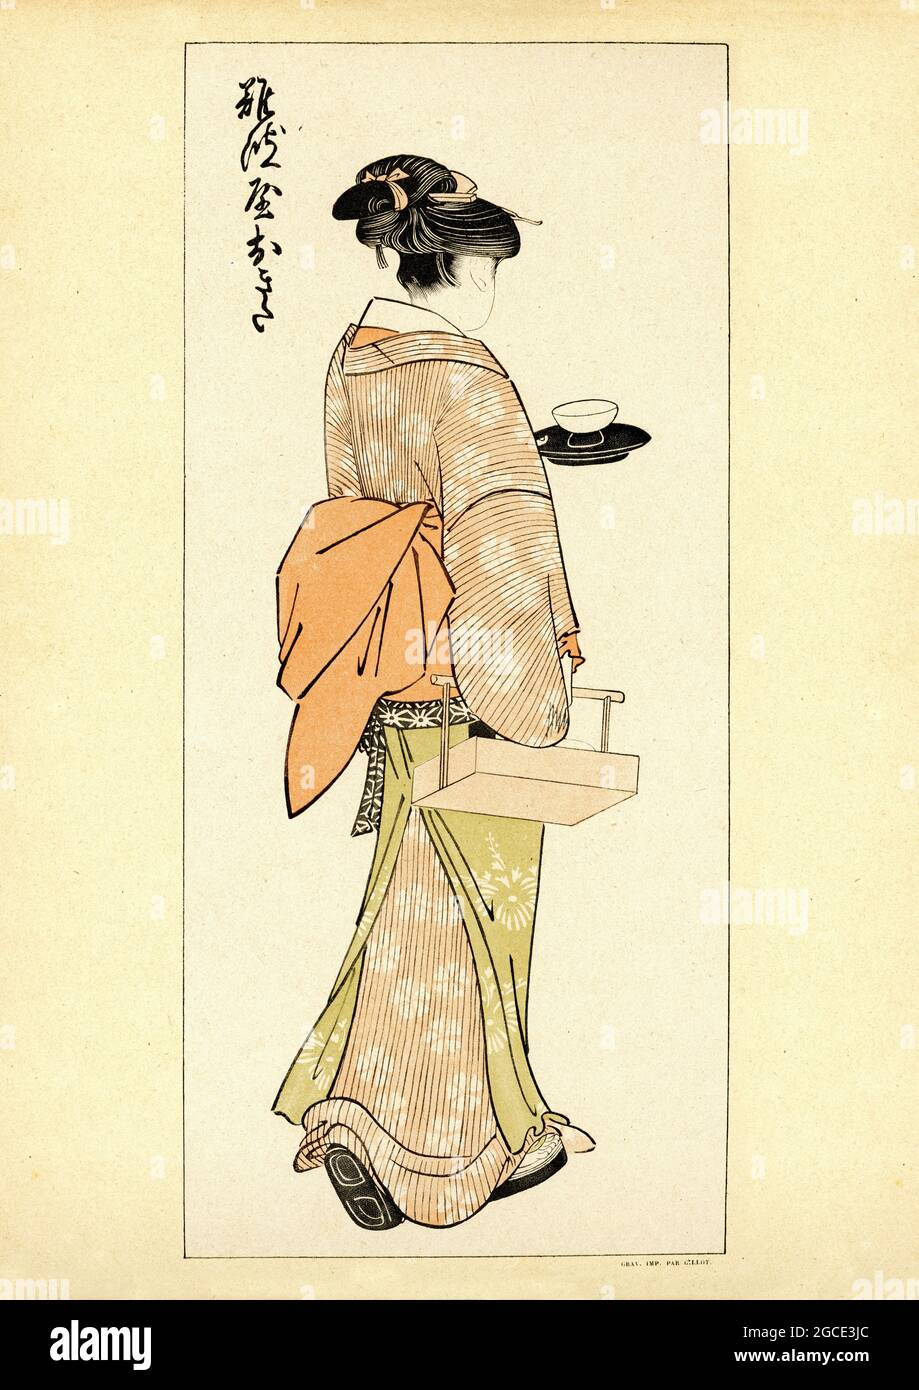 Vintage Japanese art. Servant at an Inn by Utamaro. Kitagawa Utamaro c. 1753 to 1806 was a Japanese artist. He is one of the most highly regarded prac Stock Photo